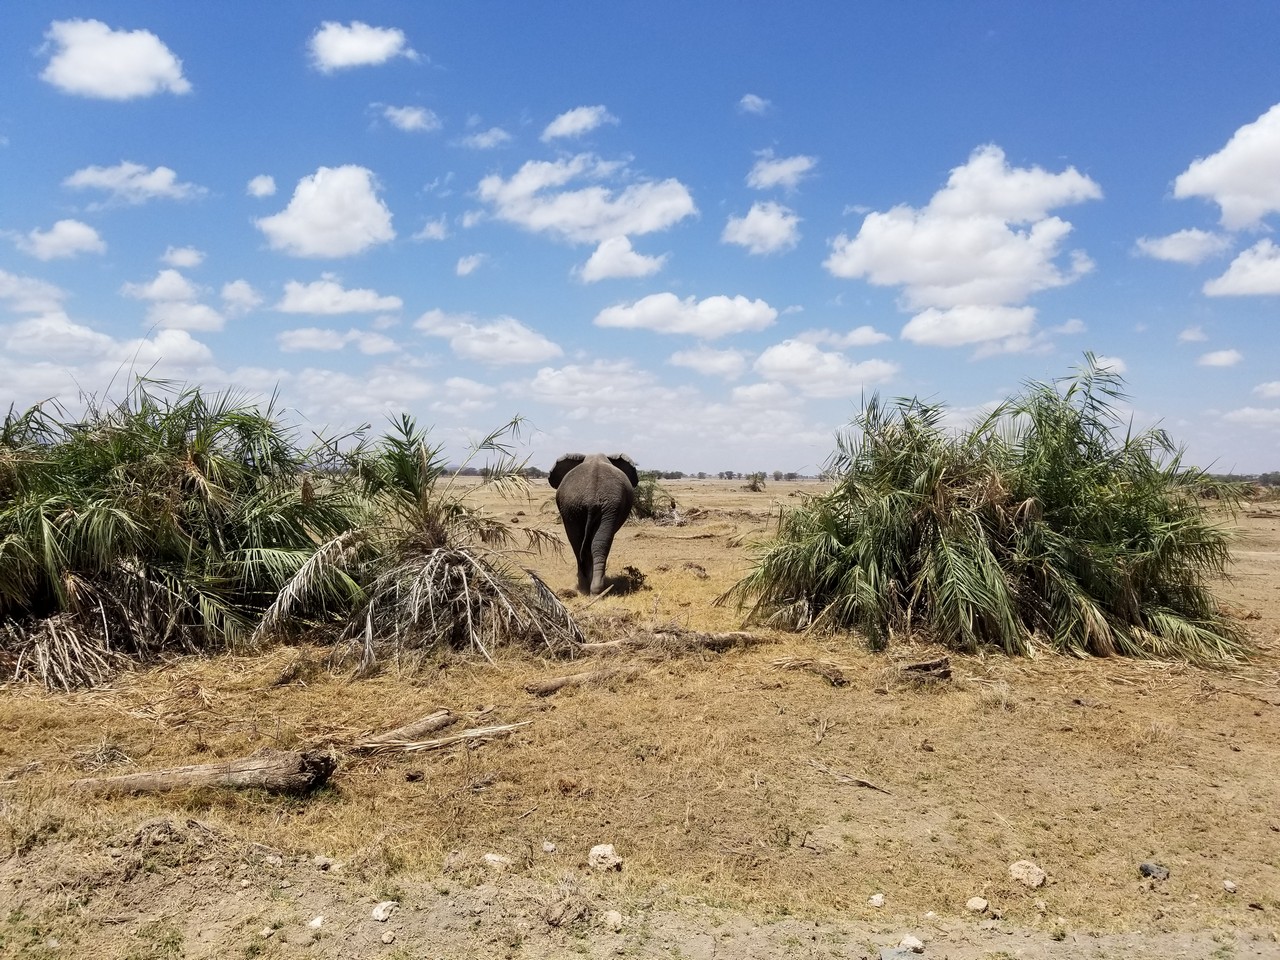 an elephant walking through a field with palm trees